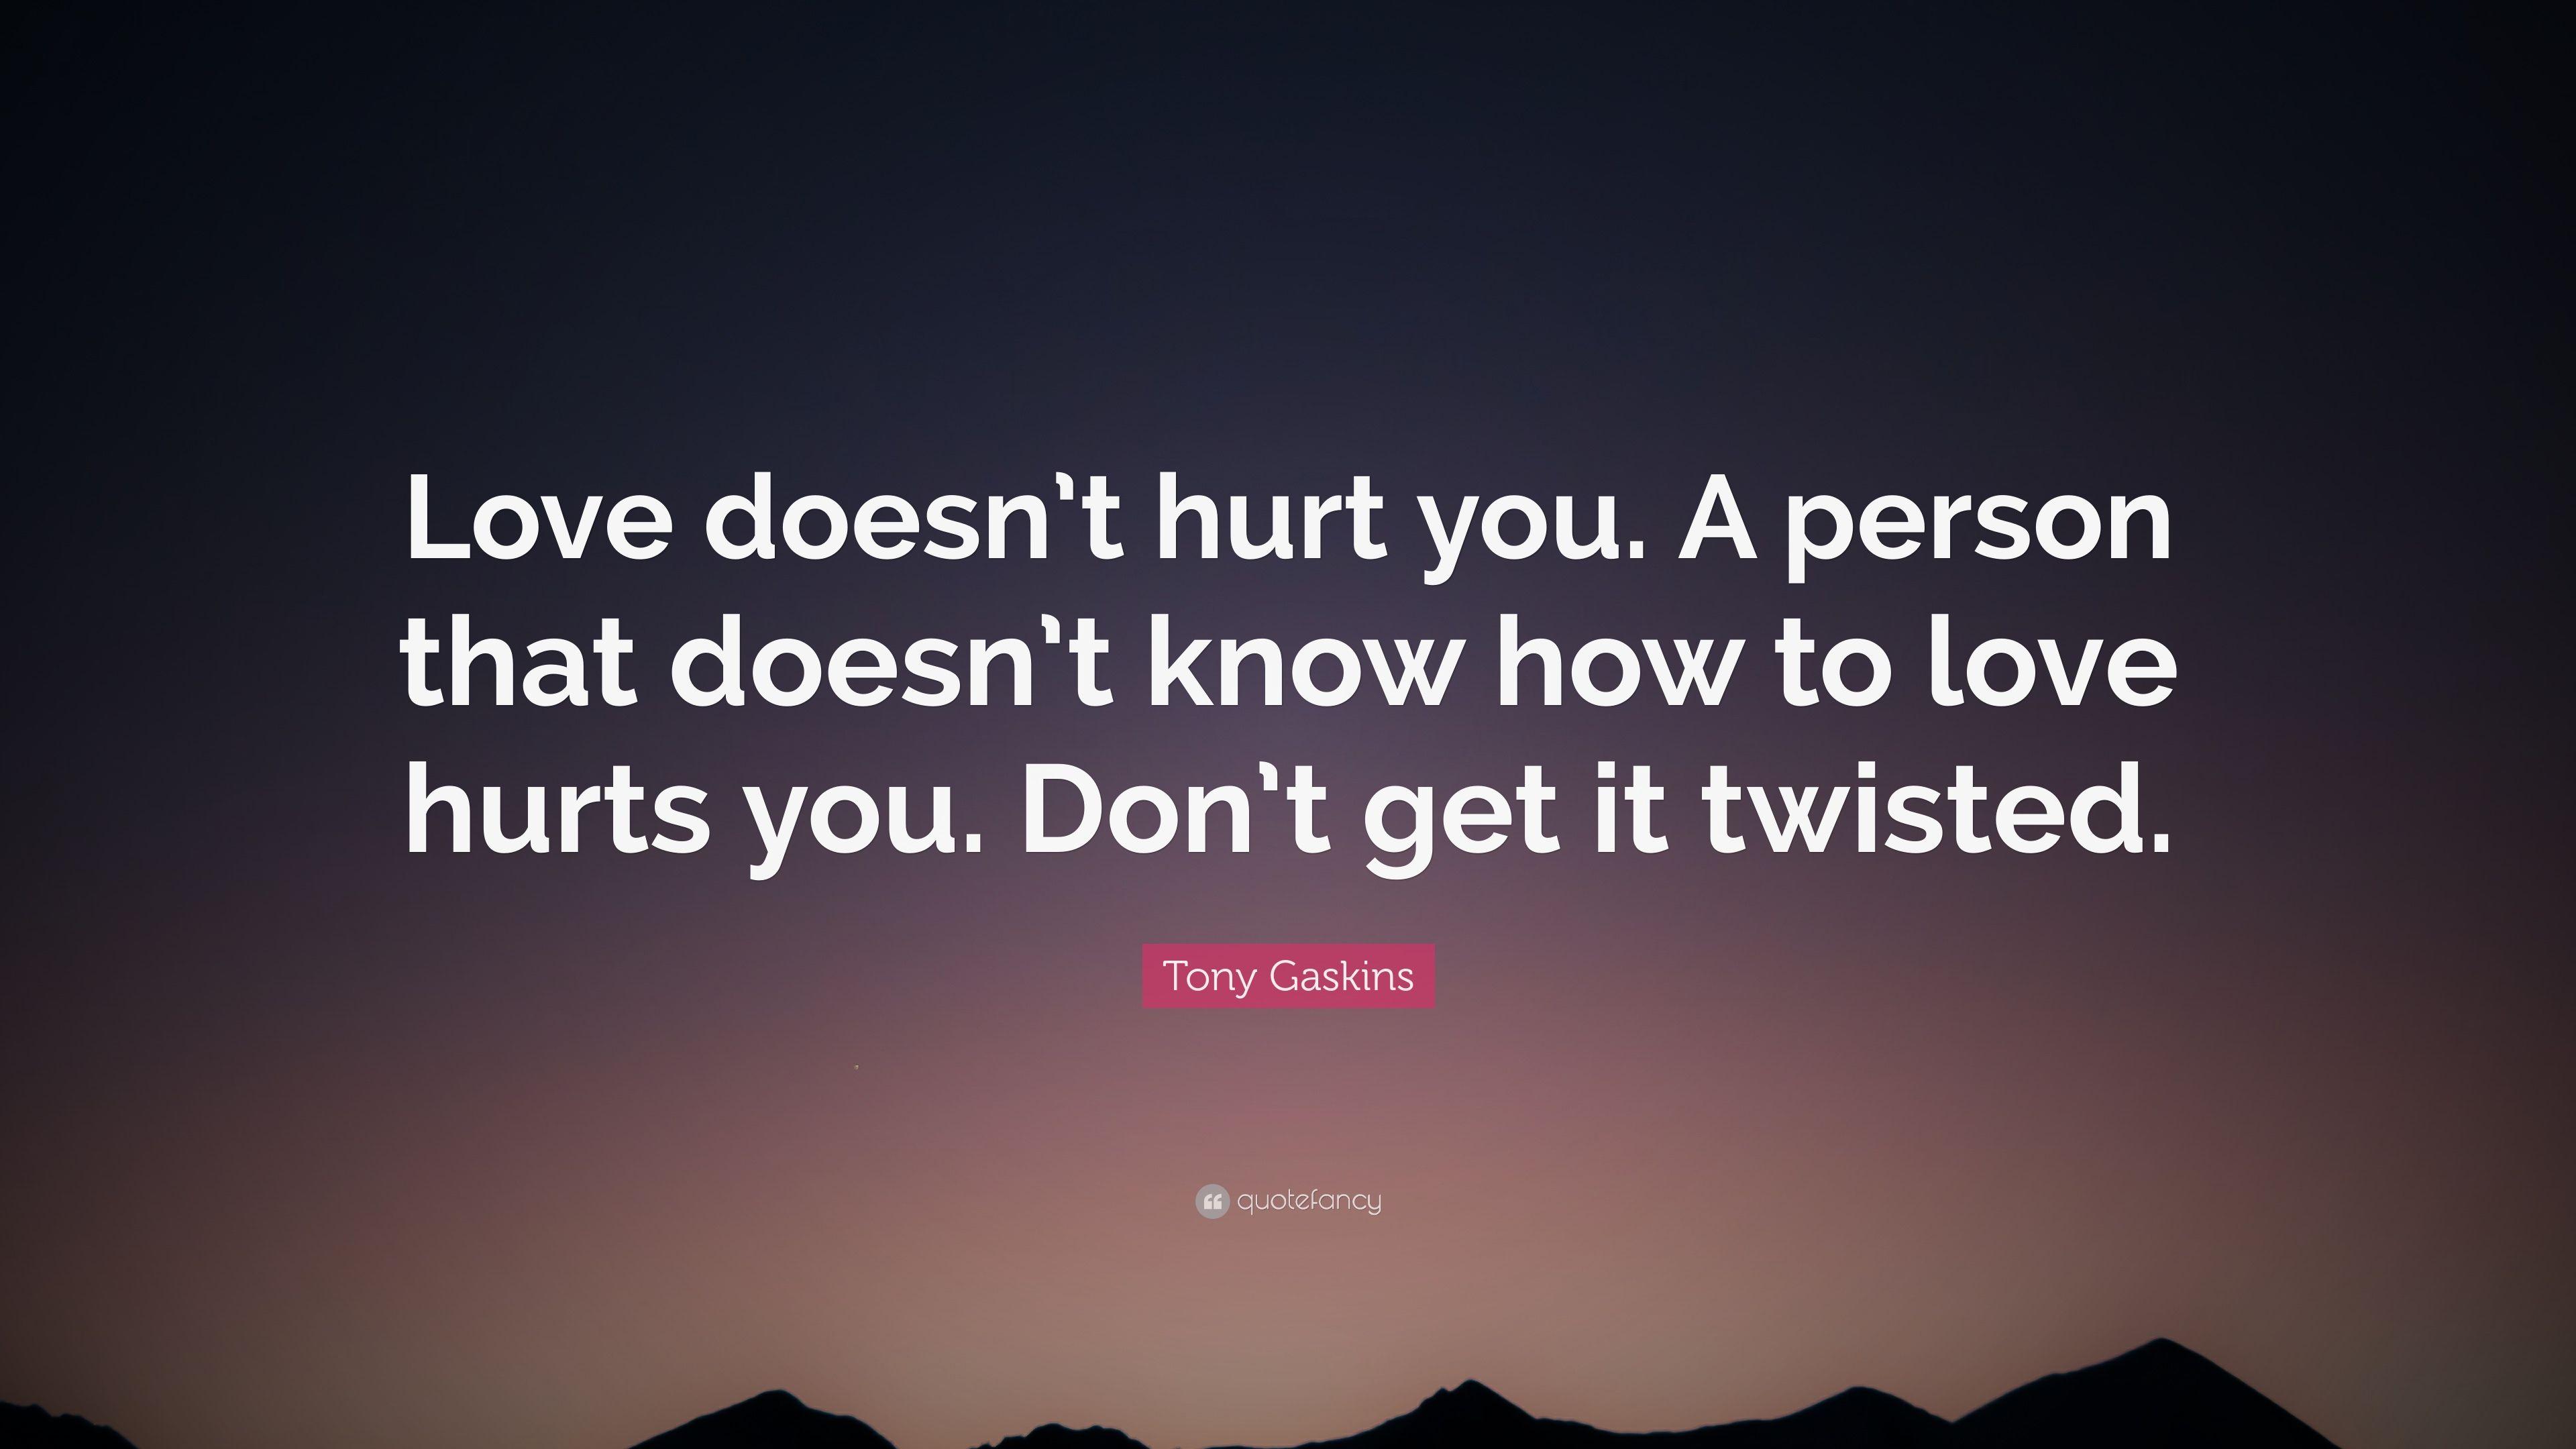 Tony Gaskins Quote: “Love doesn't hurt you. A person that doesn't